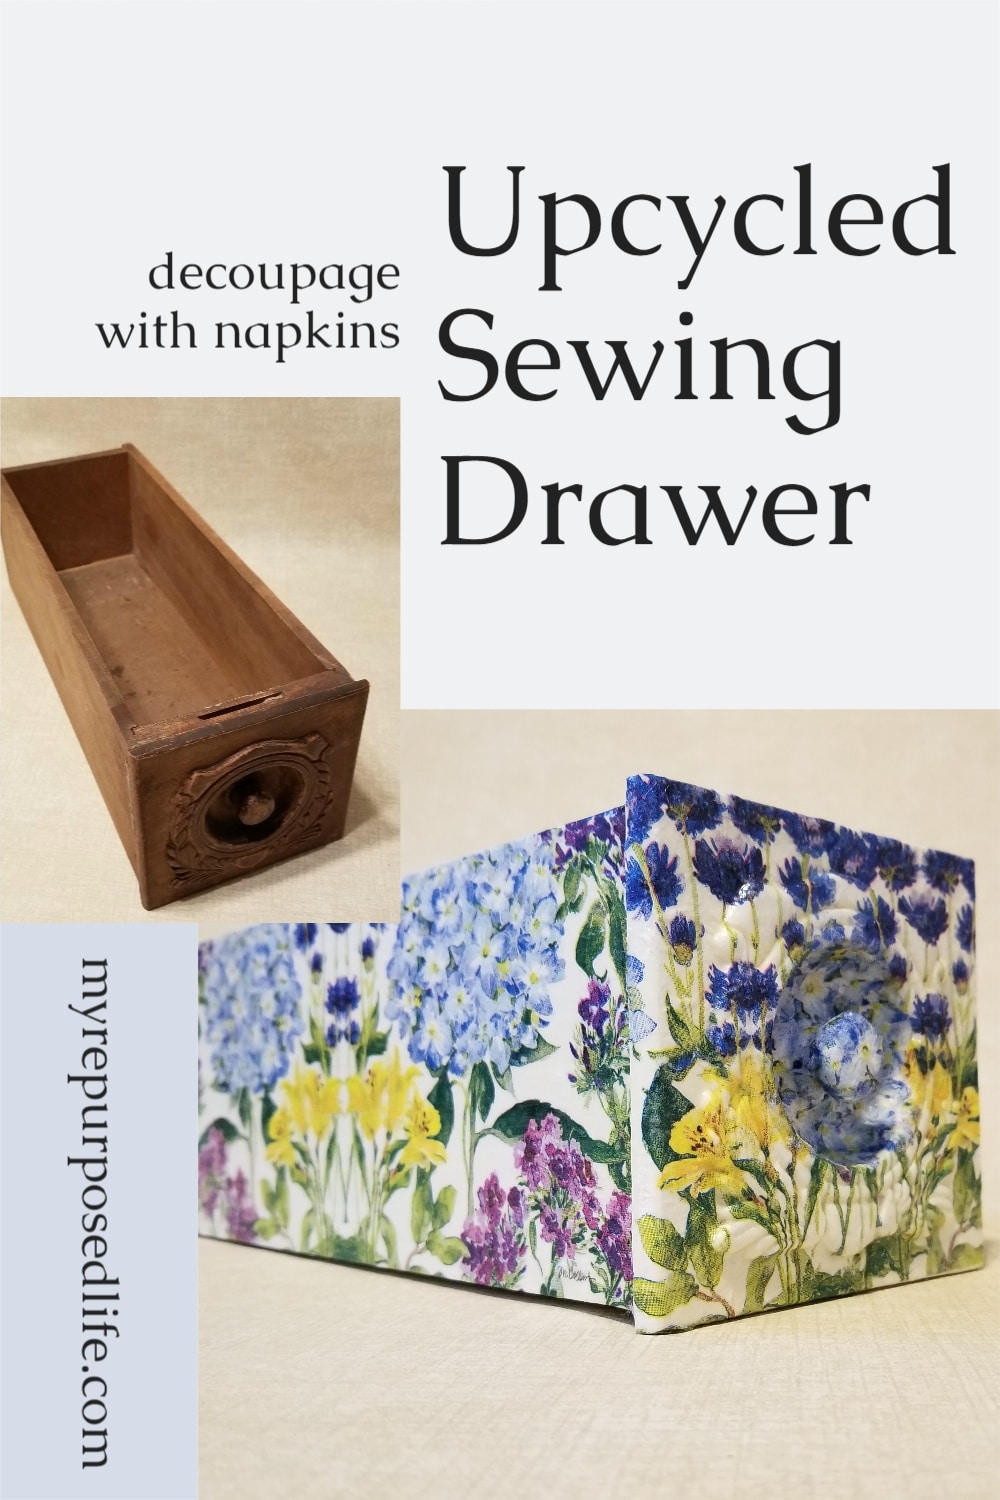 How to decoupage a vintage sewing drawer using hydrangea napkins. Step by step instructions with lots of tips to make your project quick and easy! #MyRepurposedLife #repurposed #decoupage #vintage #sewing #drawer #decoupagewithnapkins via @repurposedlife